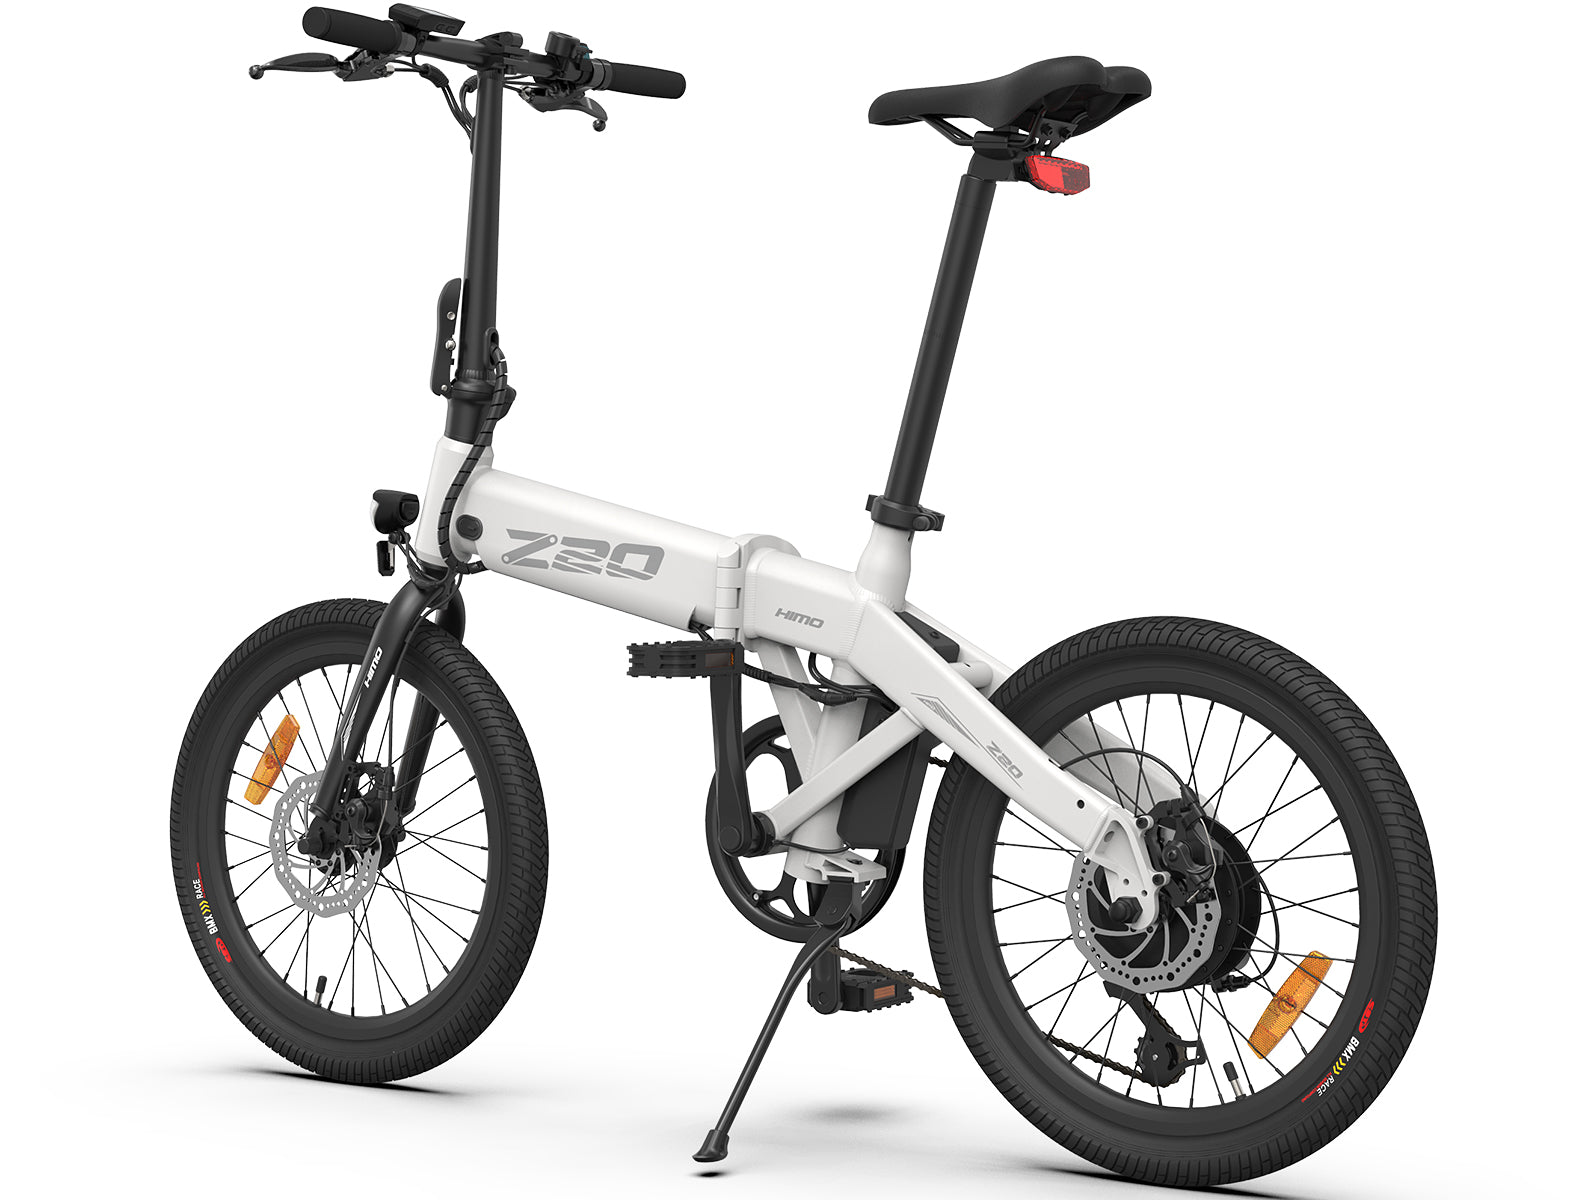 Adoebike Official Store, The Best Electric Bikes